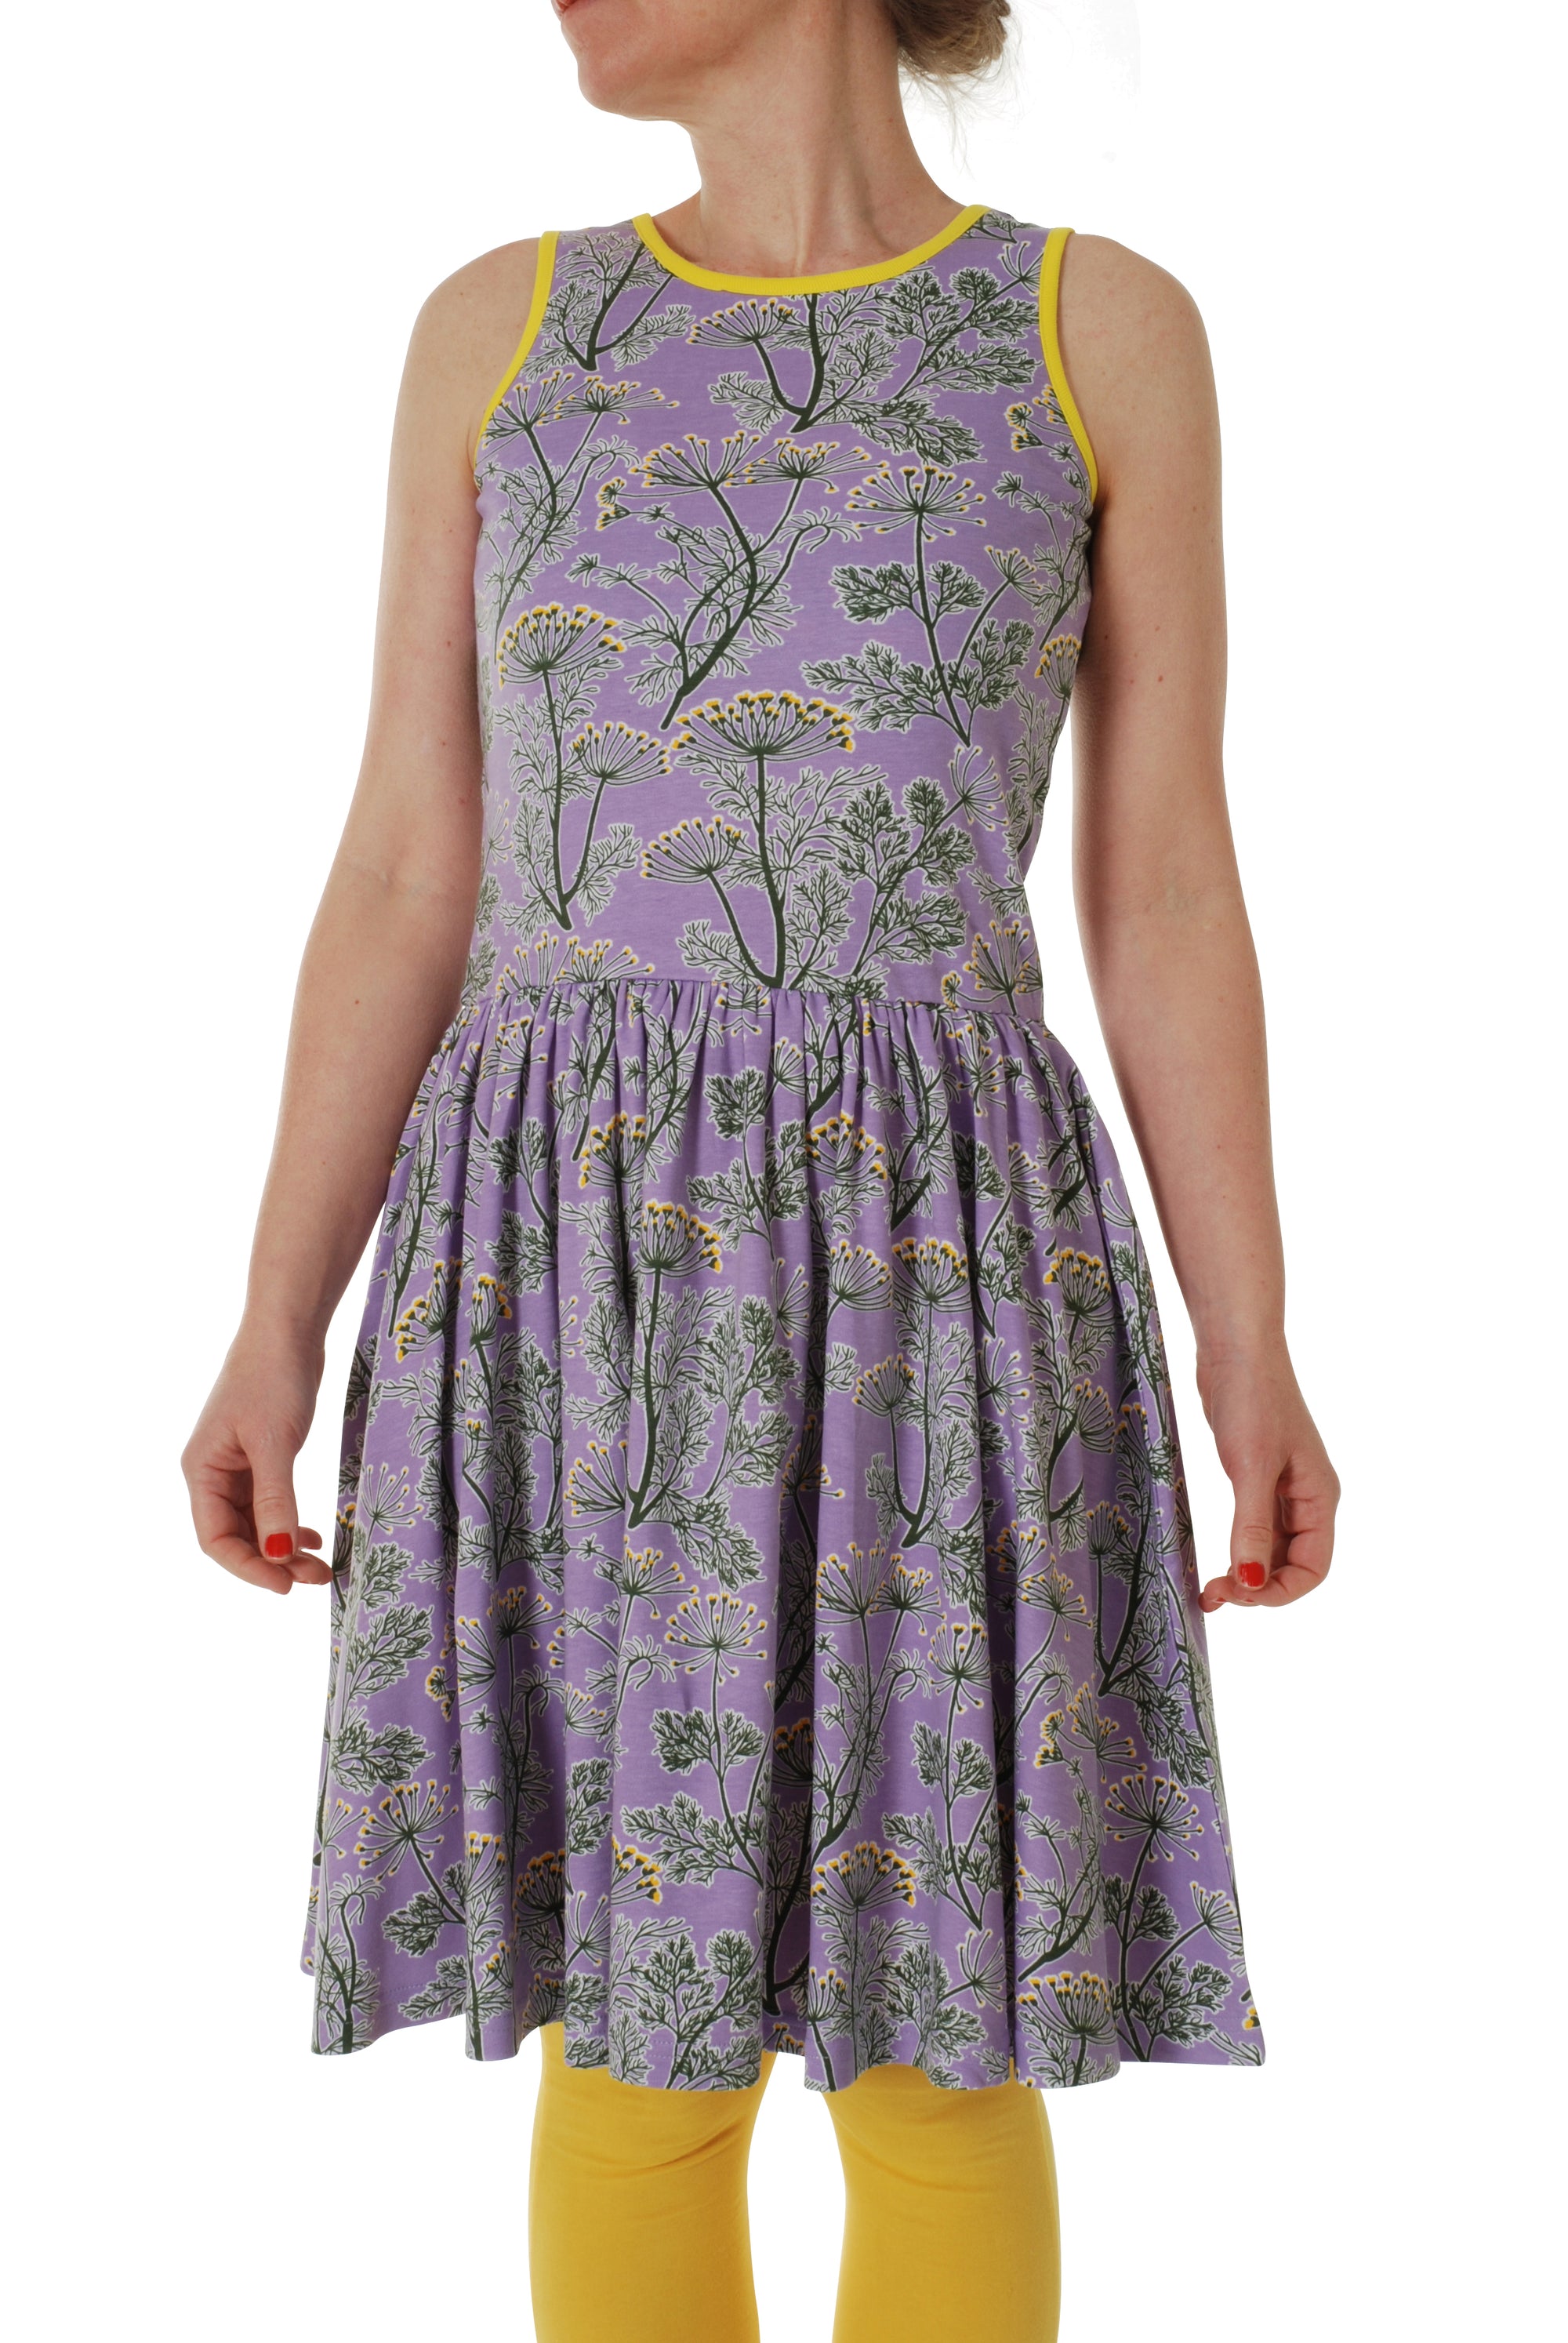 Duns Sweden ADULTS - Sleeveless Dress Dill Violet - Dille Lila